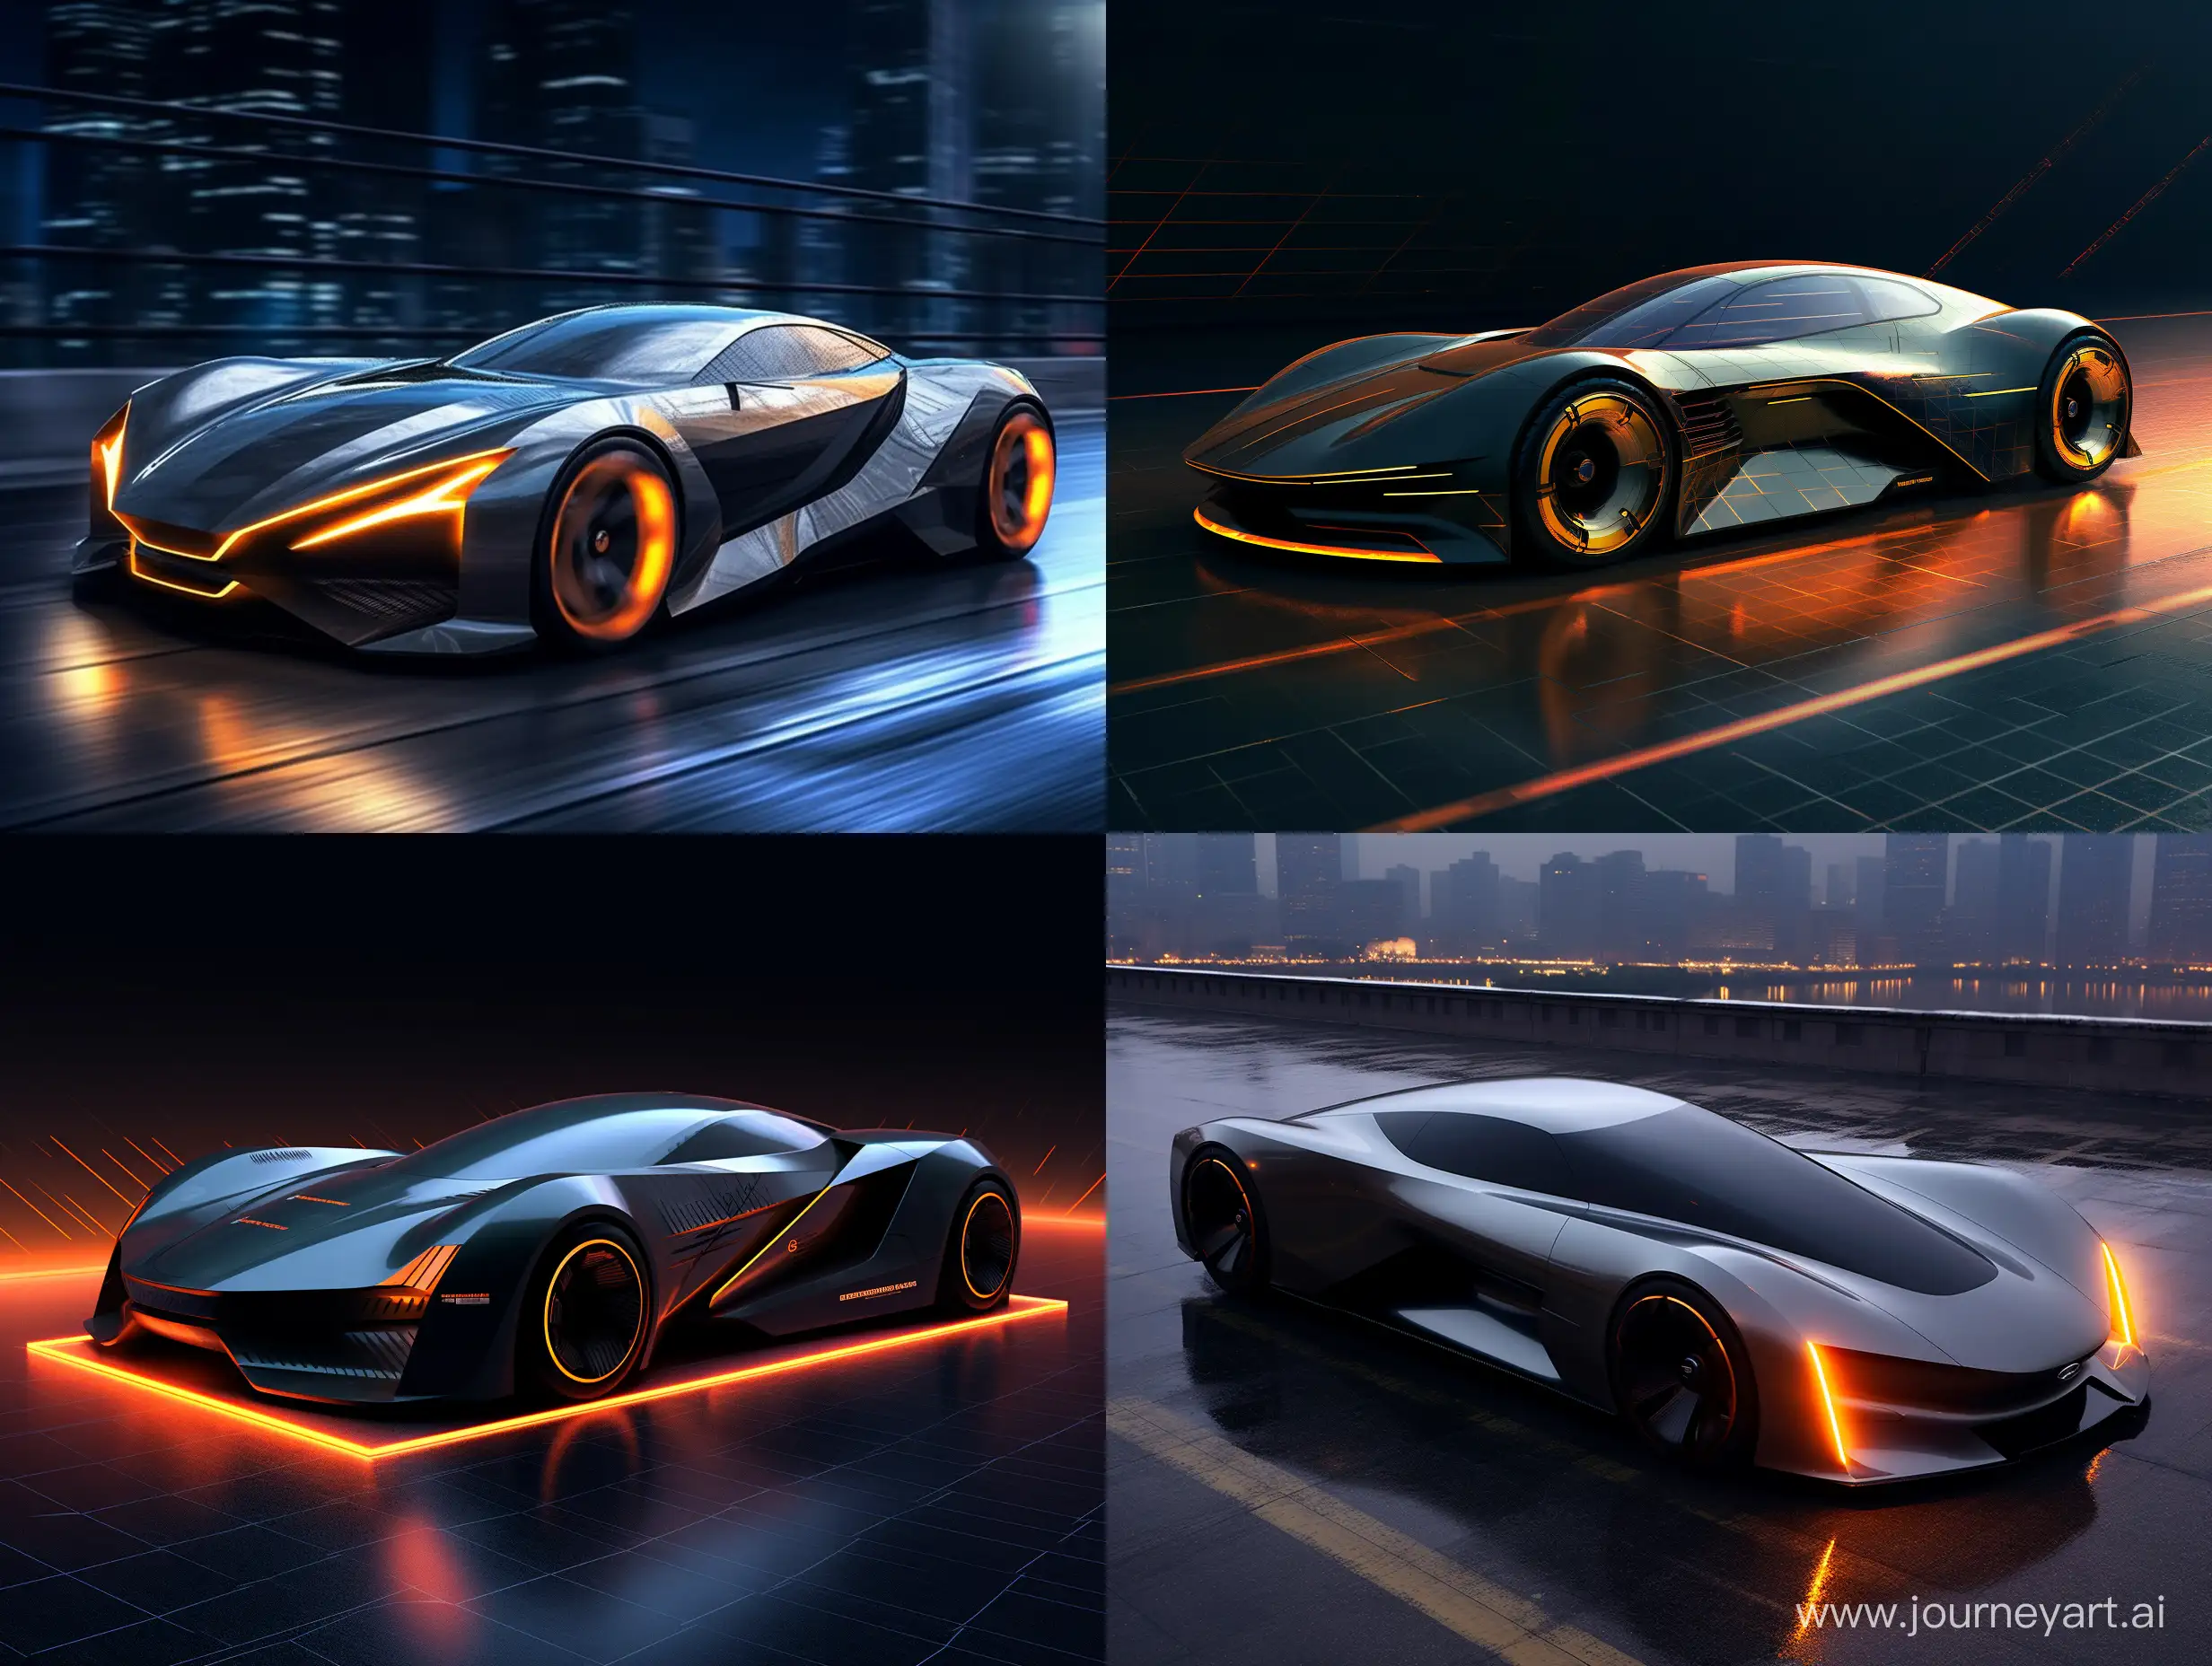 Blade runner 2049 ,Design a sleek,with doors, futuristic car blueprint featuring advanced aerodynamics, cutting-edge sustainable energy sources, and innovative interior technologies. Consider the integration of AI-driven autonomous features, and emphasize a dynamic yet eco-friendly aesthetic. Ensure the blueprint reflects both form and function for a revolutionary driving experience